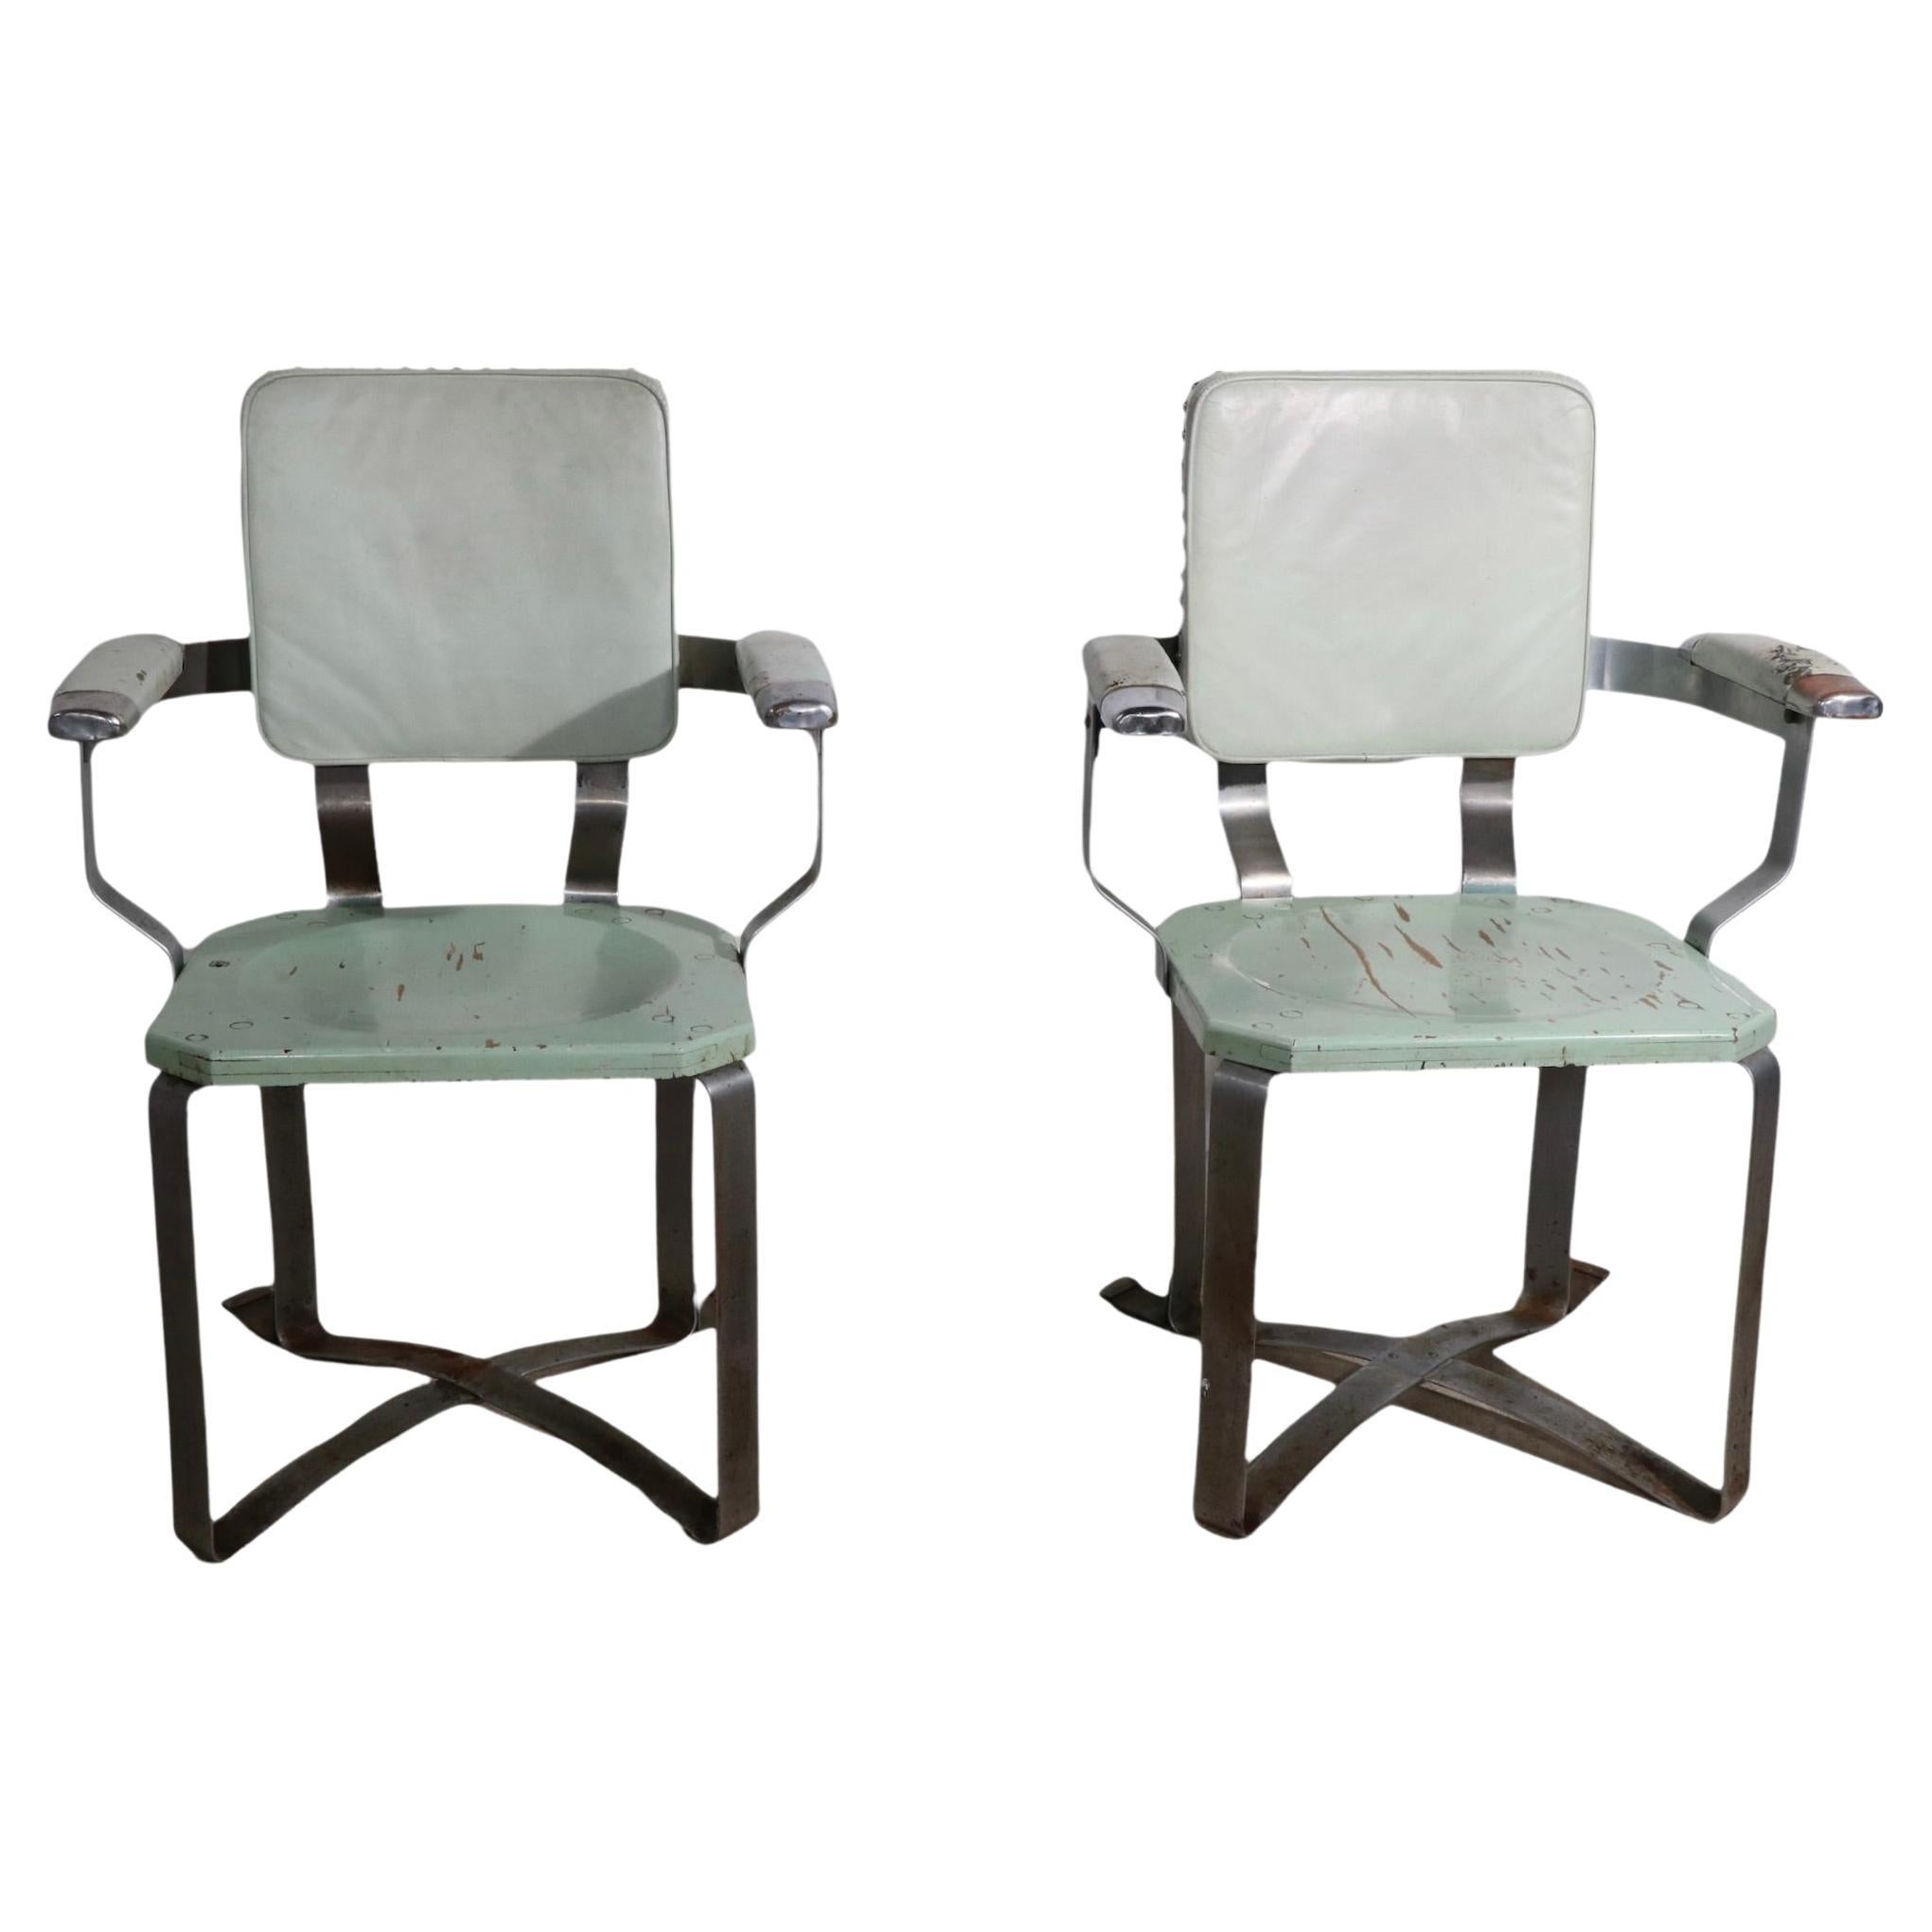 Pr. 1930's Machine Age Art Deco Arm Side Dining Chairs possibly Prototypes